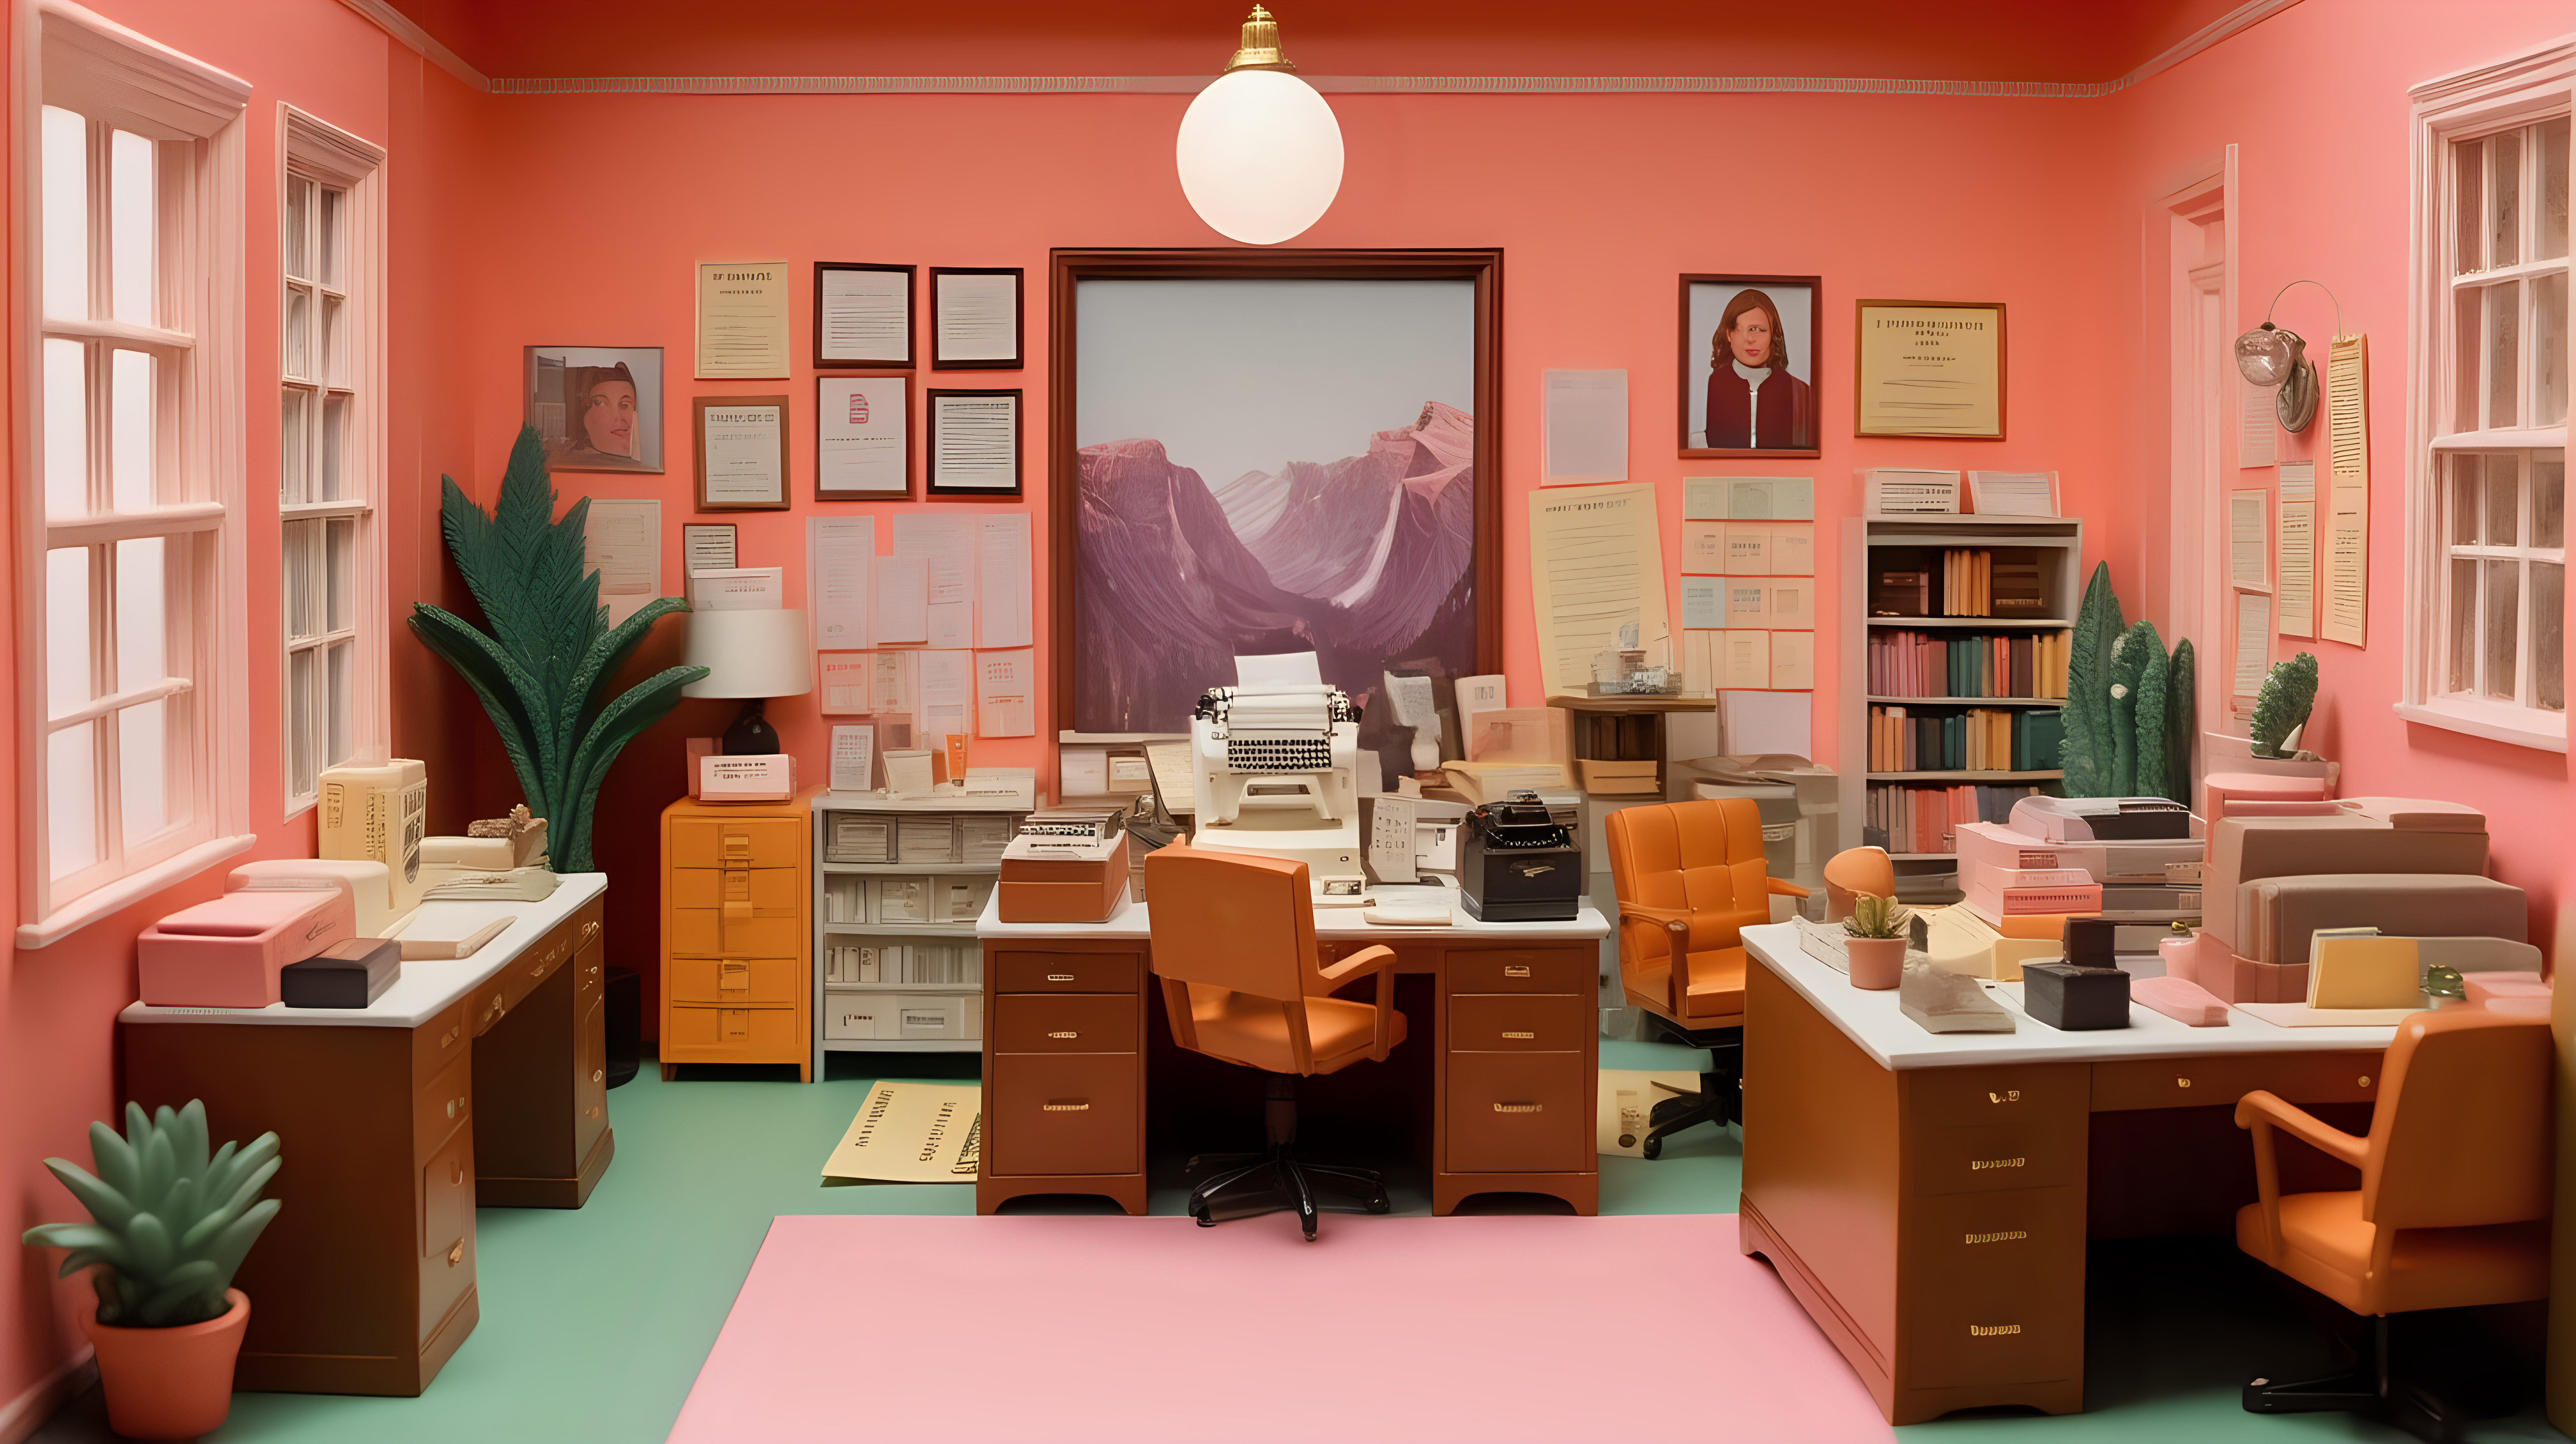 close up, high quality photograph of a diorama  of  feminist magazine offices in the style of a wes anderson movie
